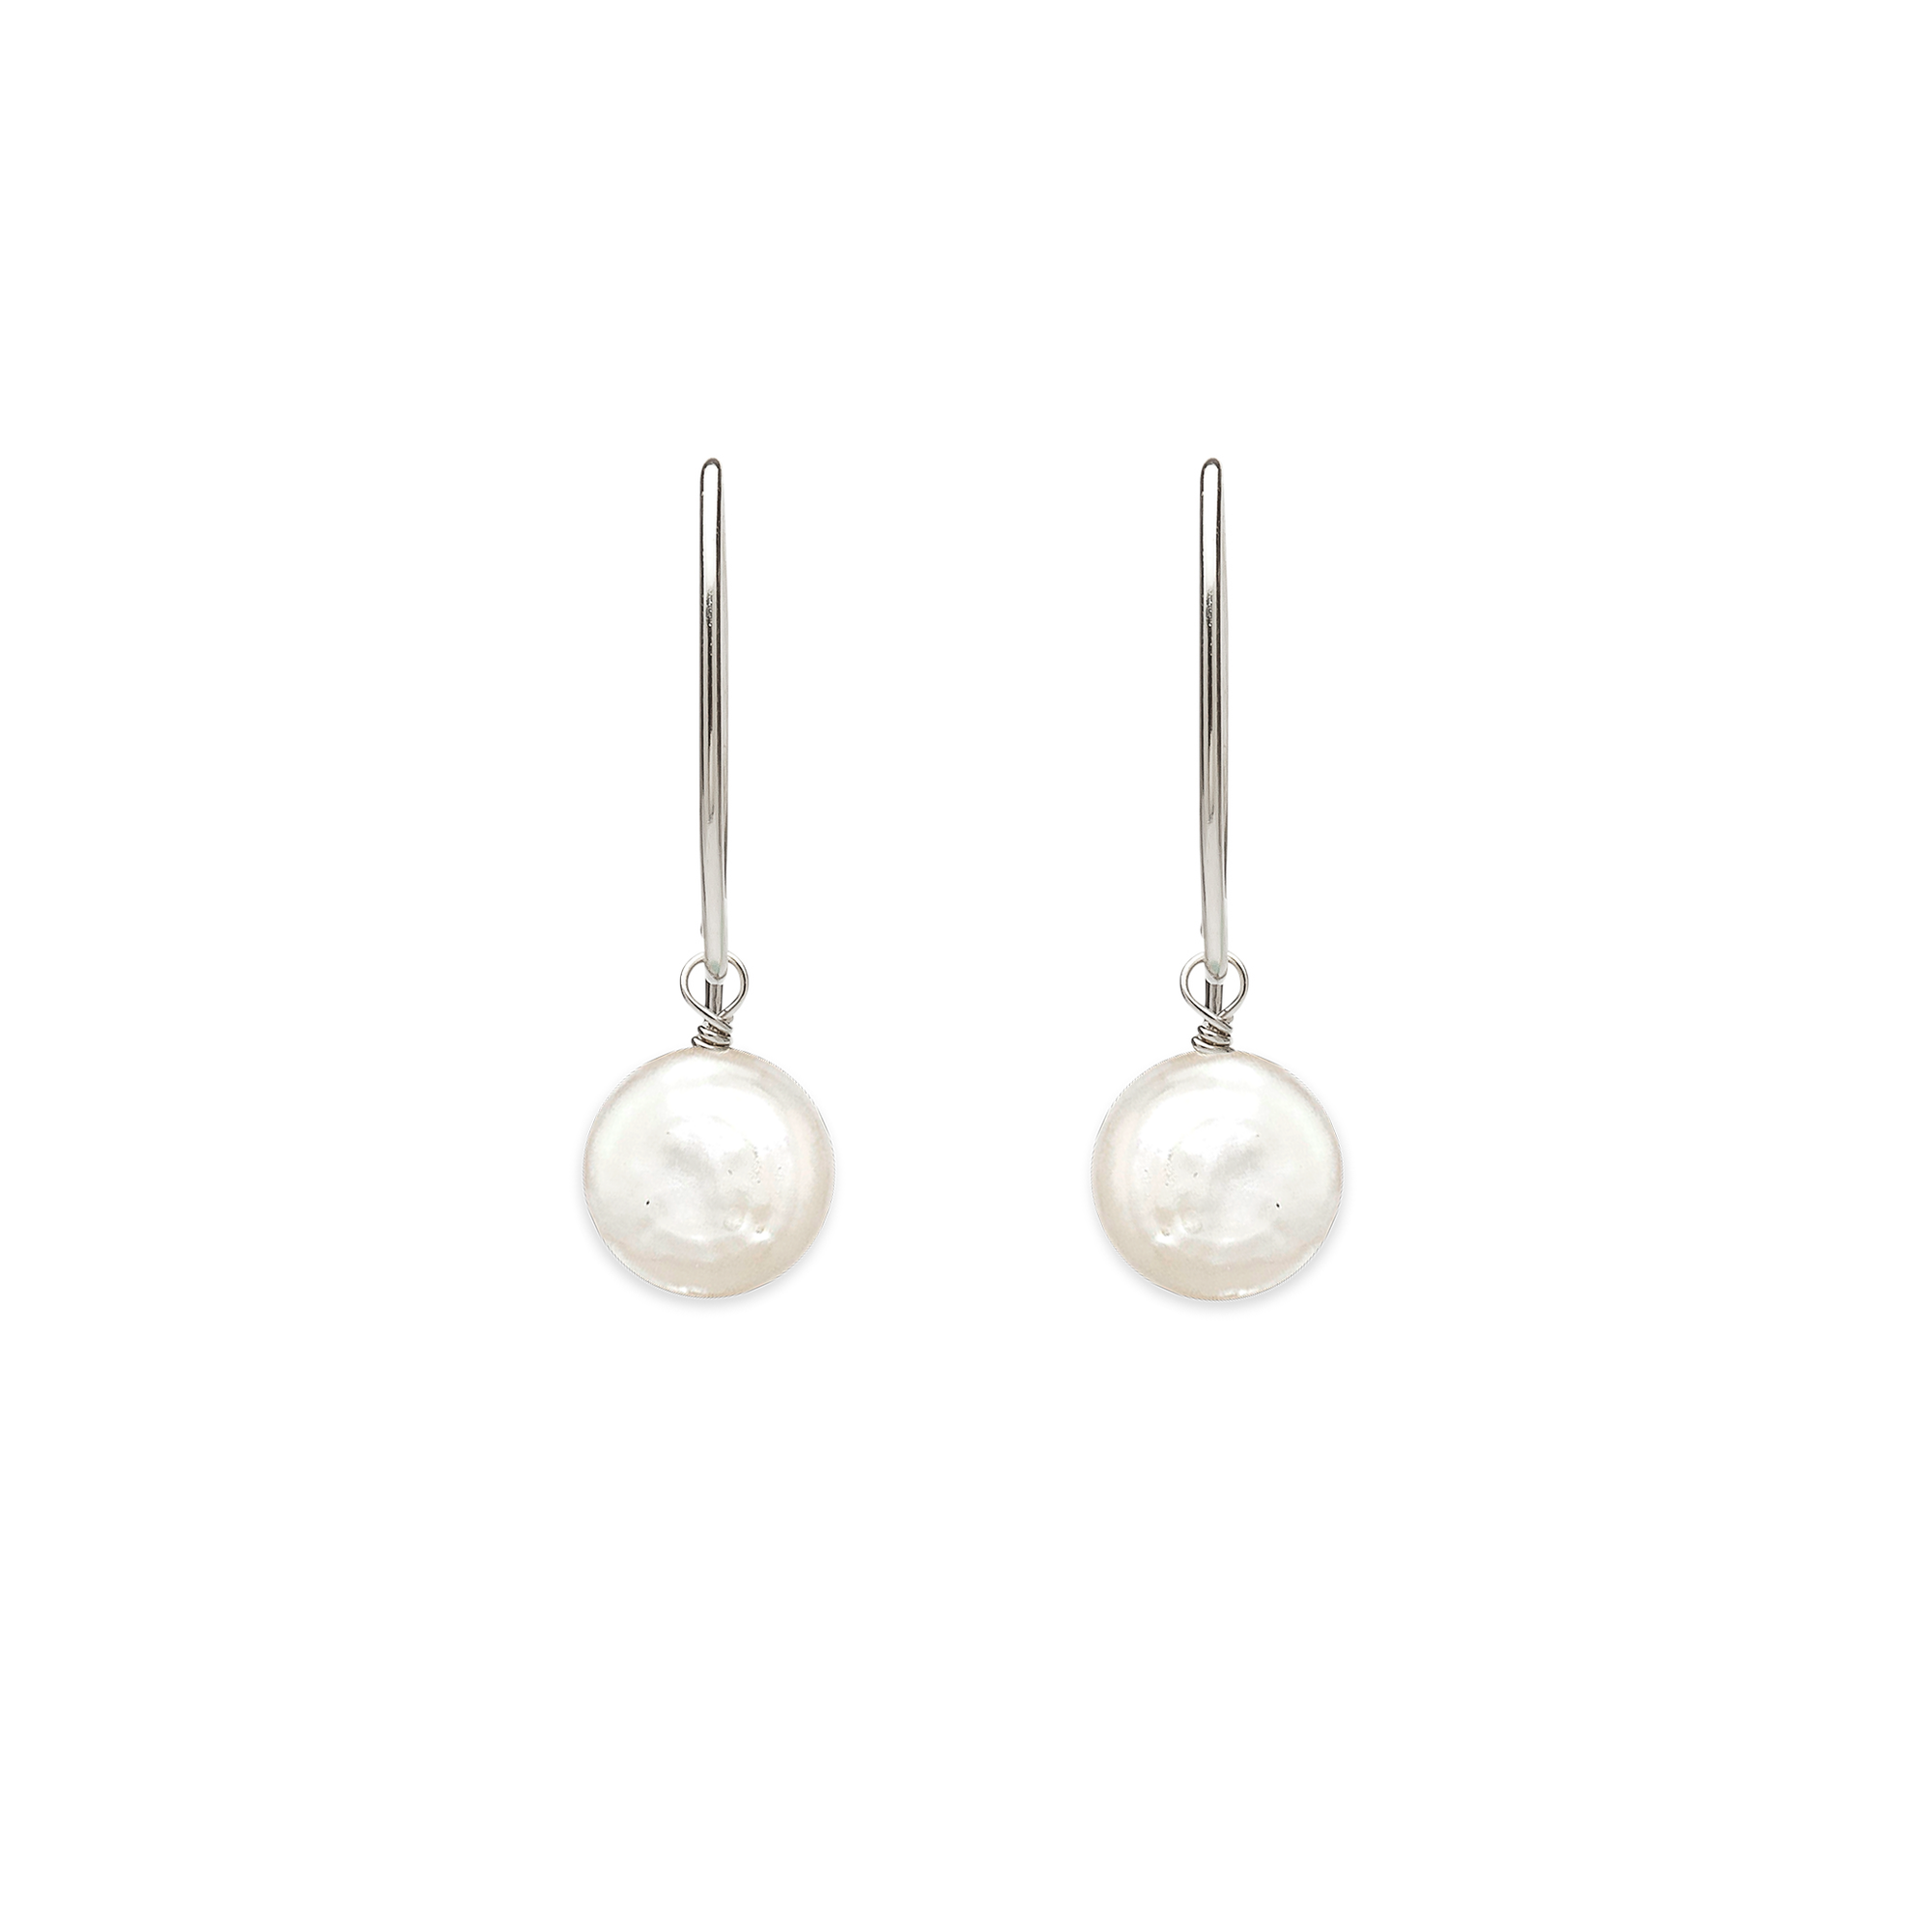 Image of silver dangle earrings with iridescent white flat coin pearl on white background